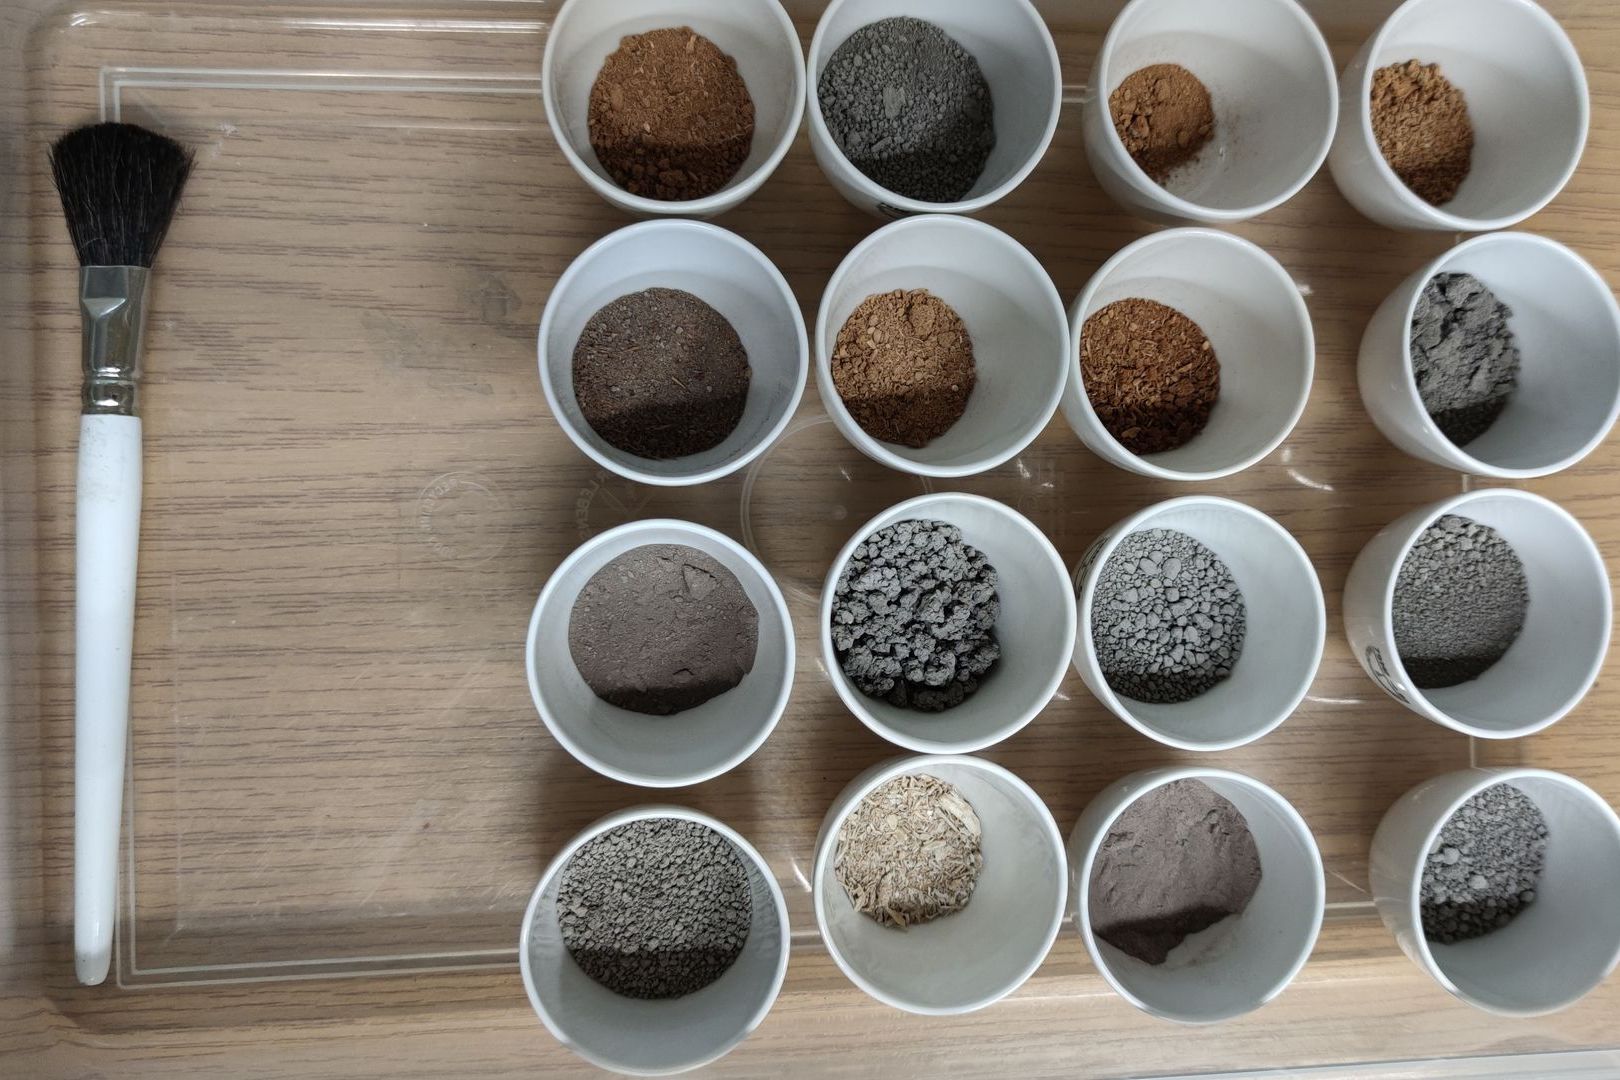 Several soil samples in crucibles after annealing.